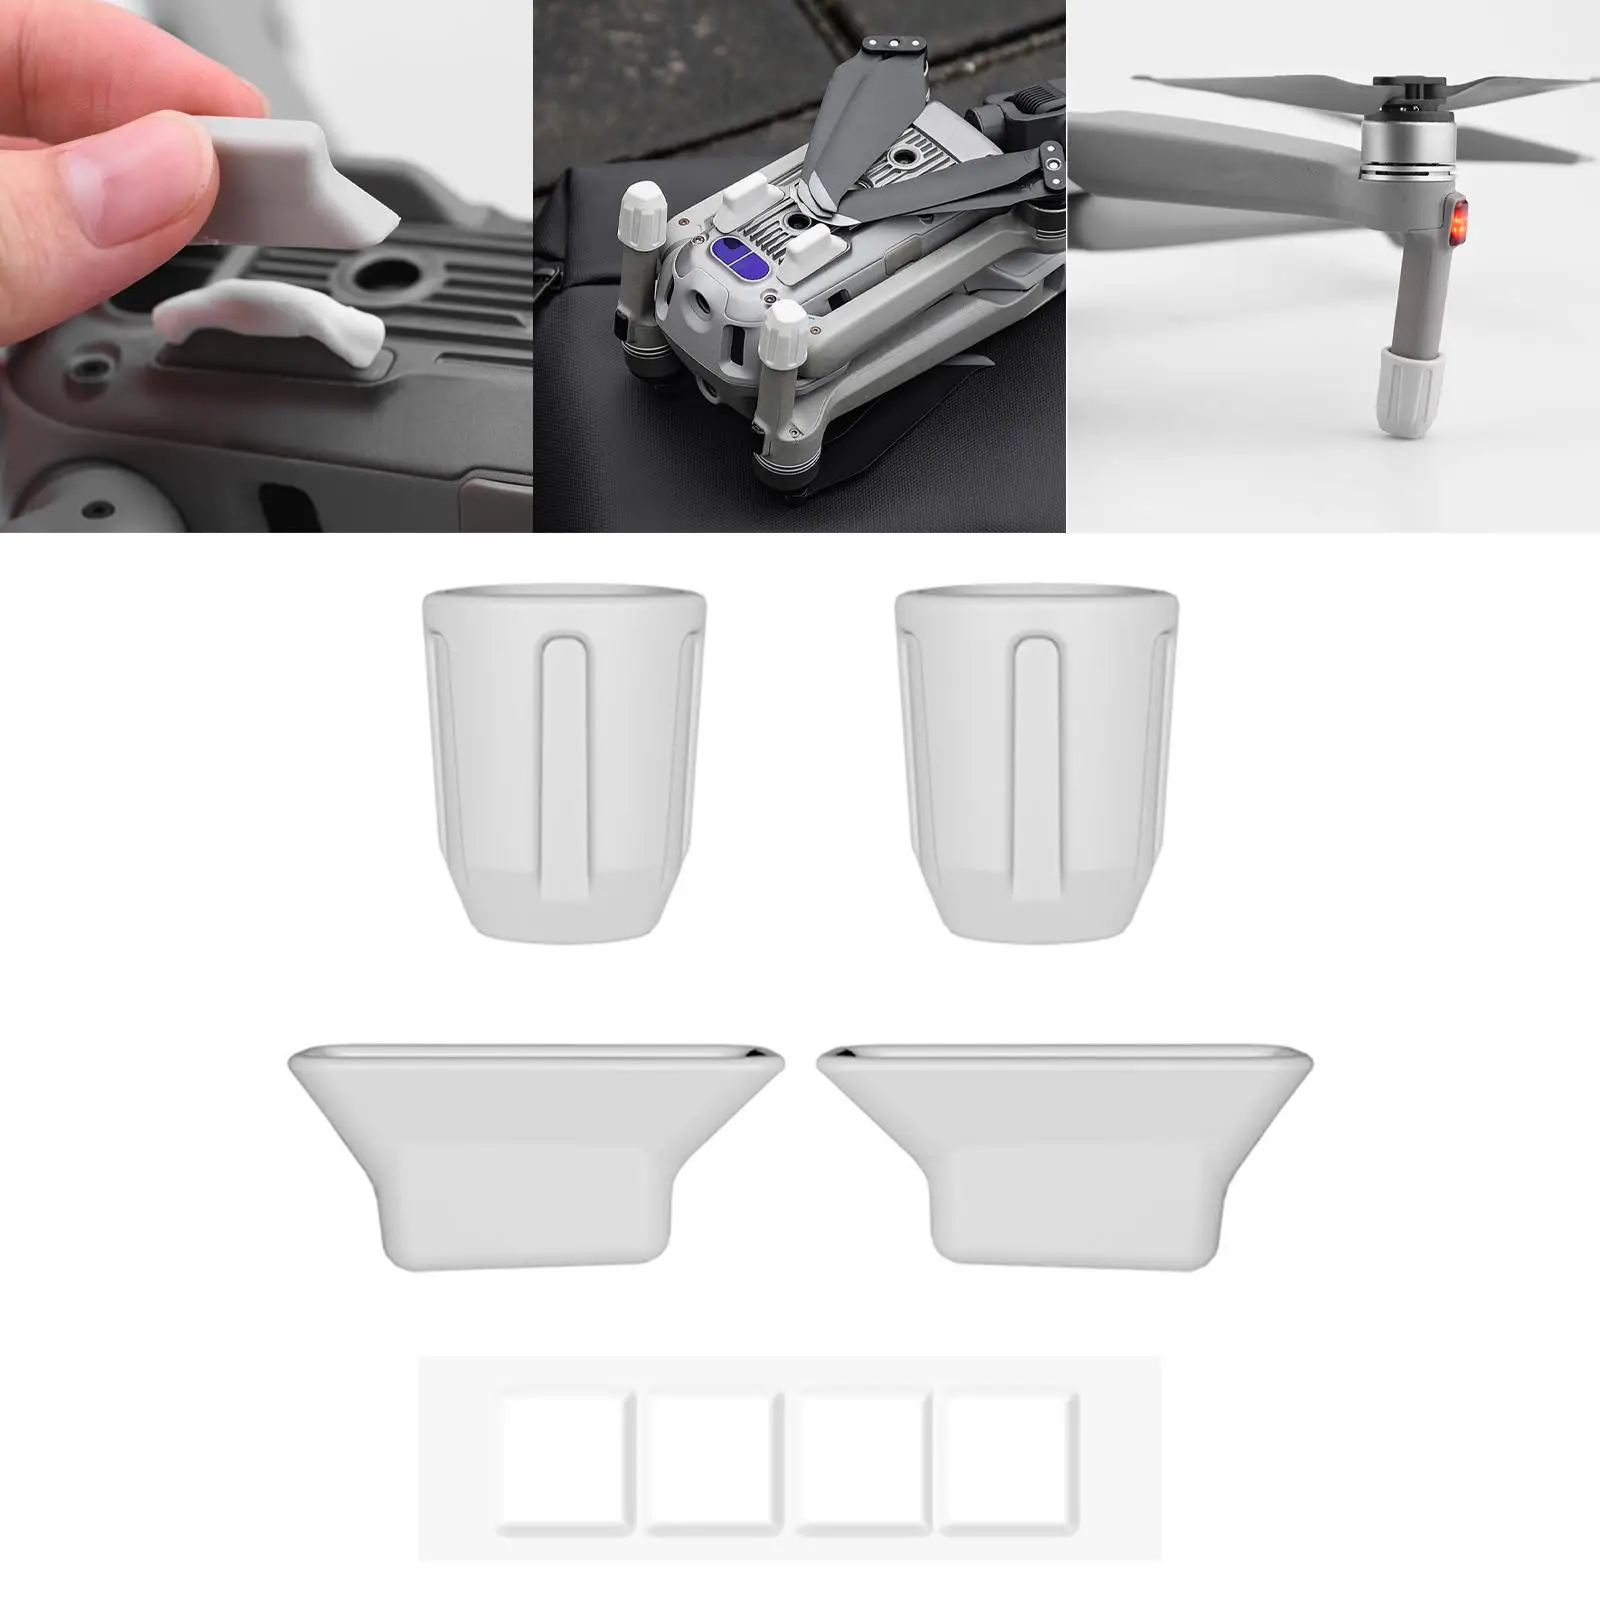 dust Mat Landing Gear Feet Protection Pad Anti Scratch Protector Kit Anti Wear Dust Plug for Air 2S Accessory Drone